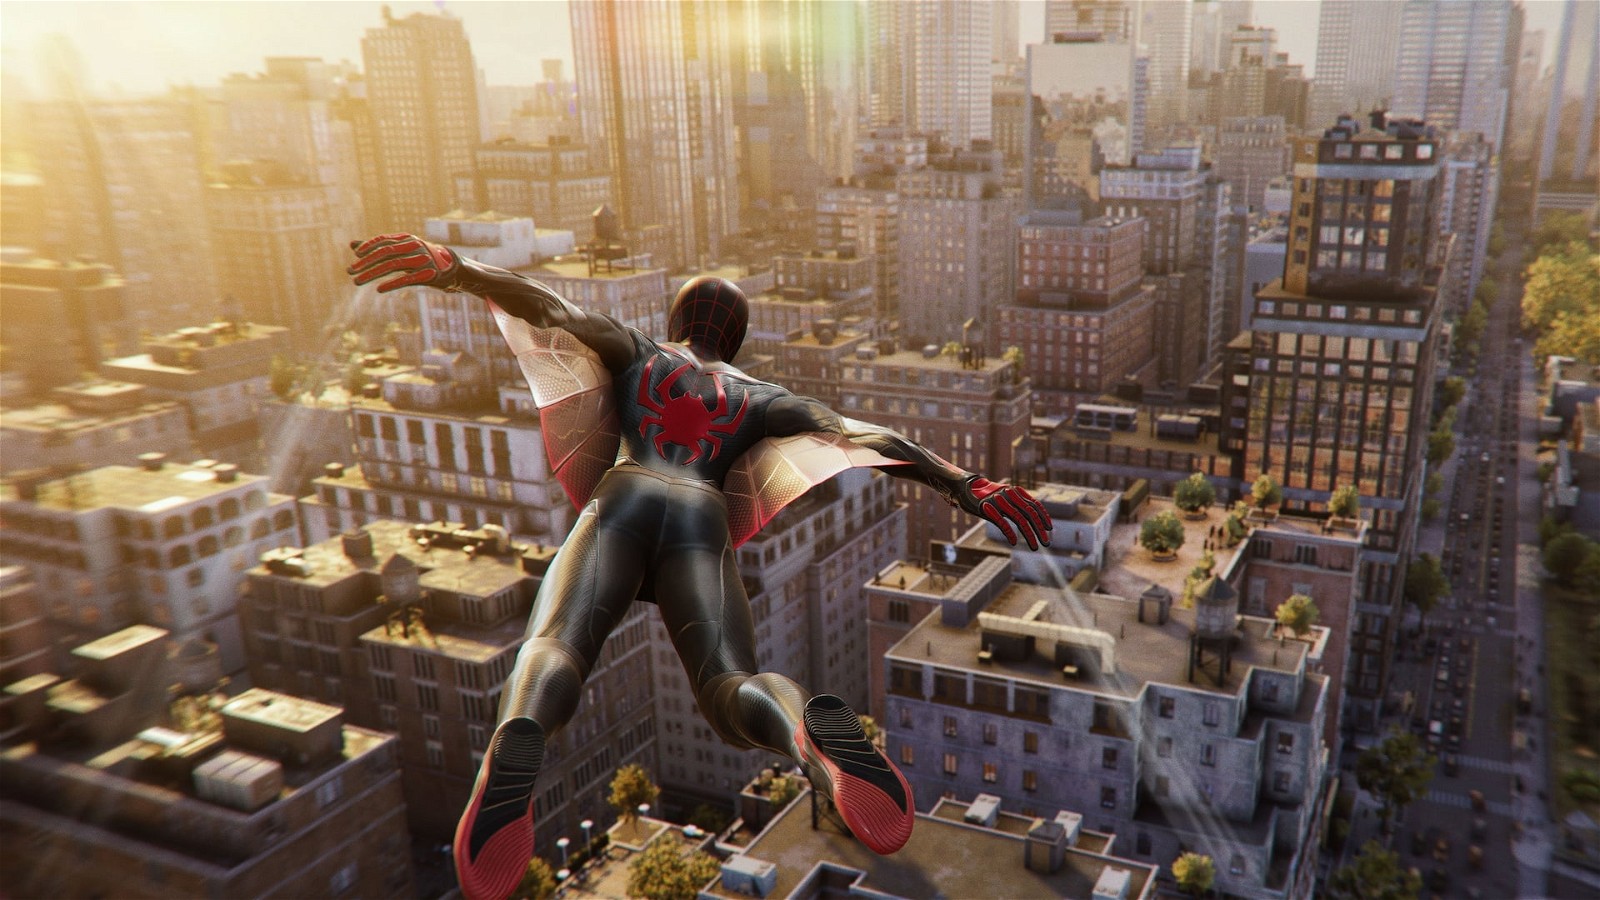 Spider-Man swings through the massive new map in Marvel's Spider-Man 2, which is nearly double the size of the original game's map.